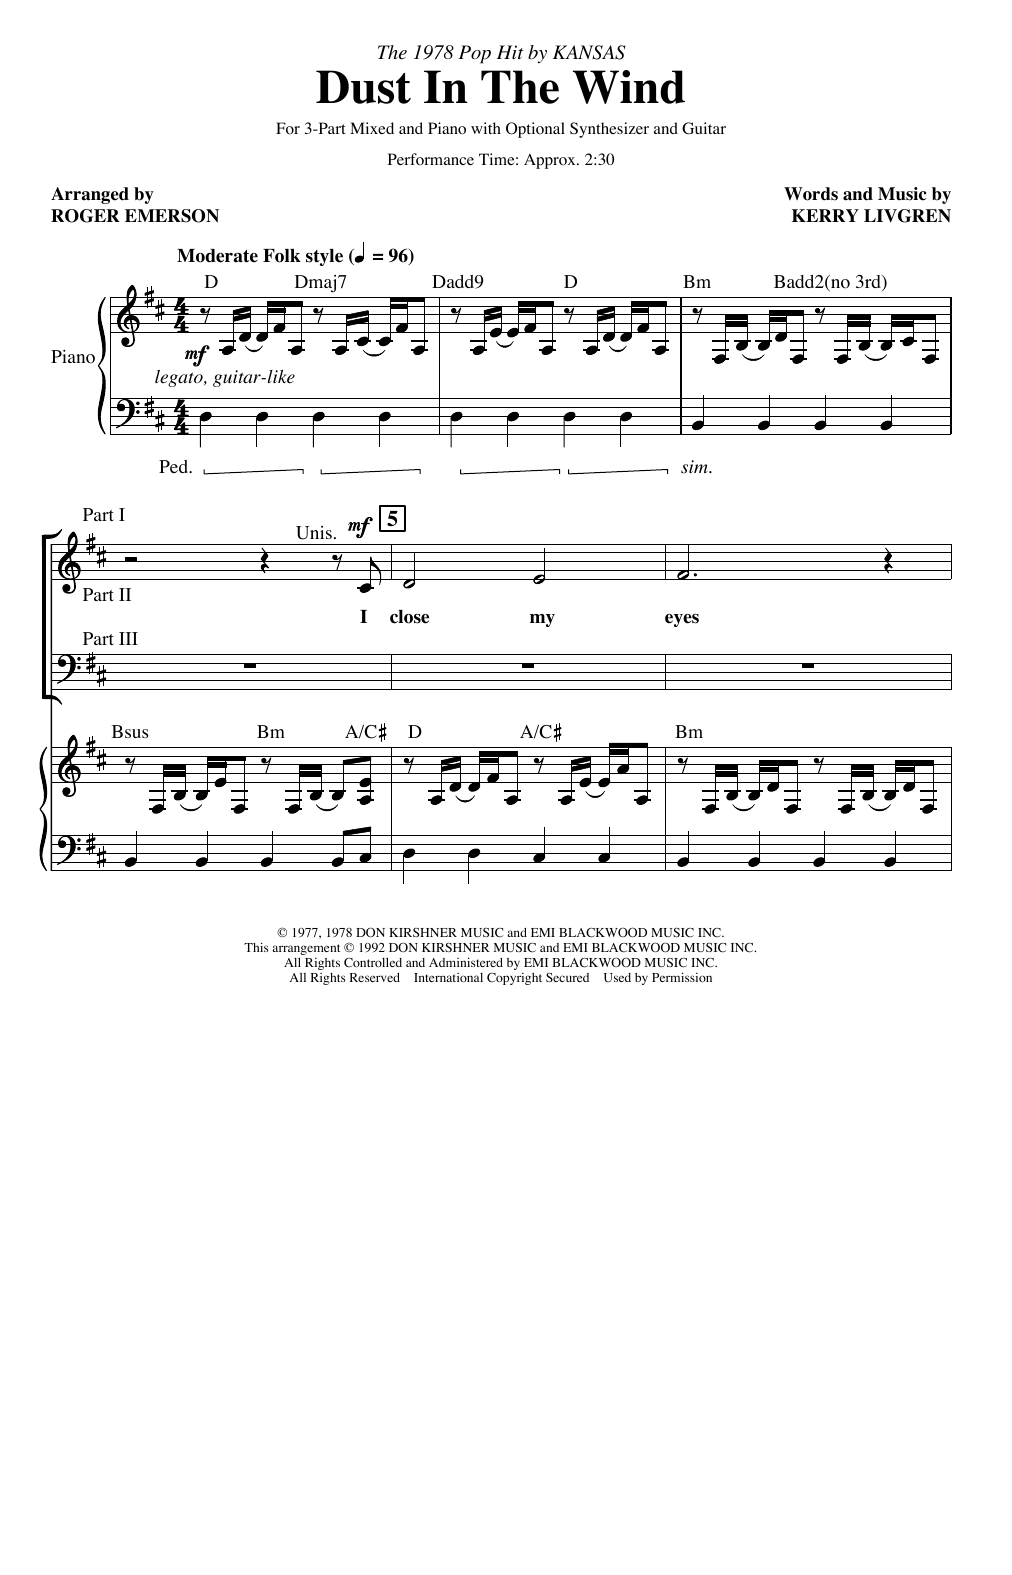 Download Kansas Dust In The Wind (arr. Roger Emerson) Sheet Music